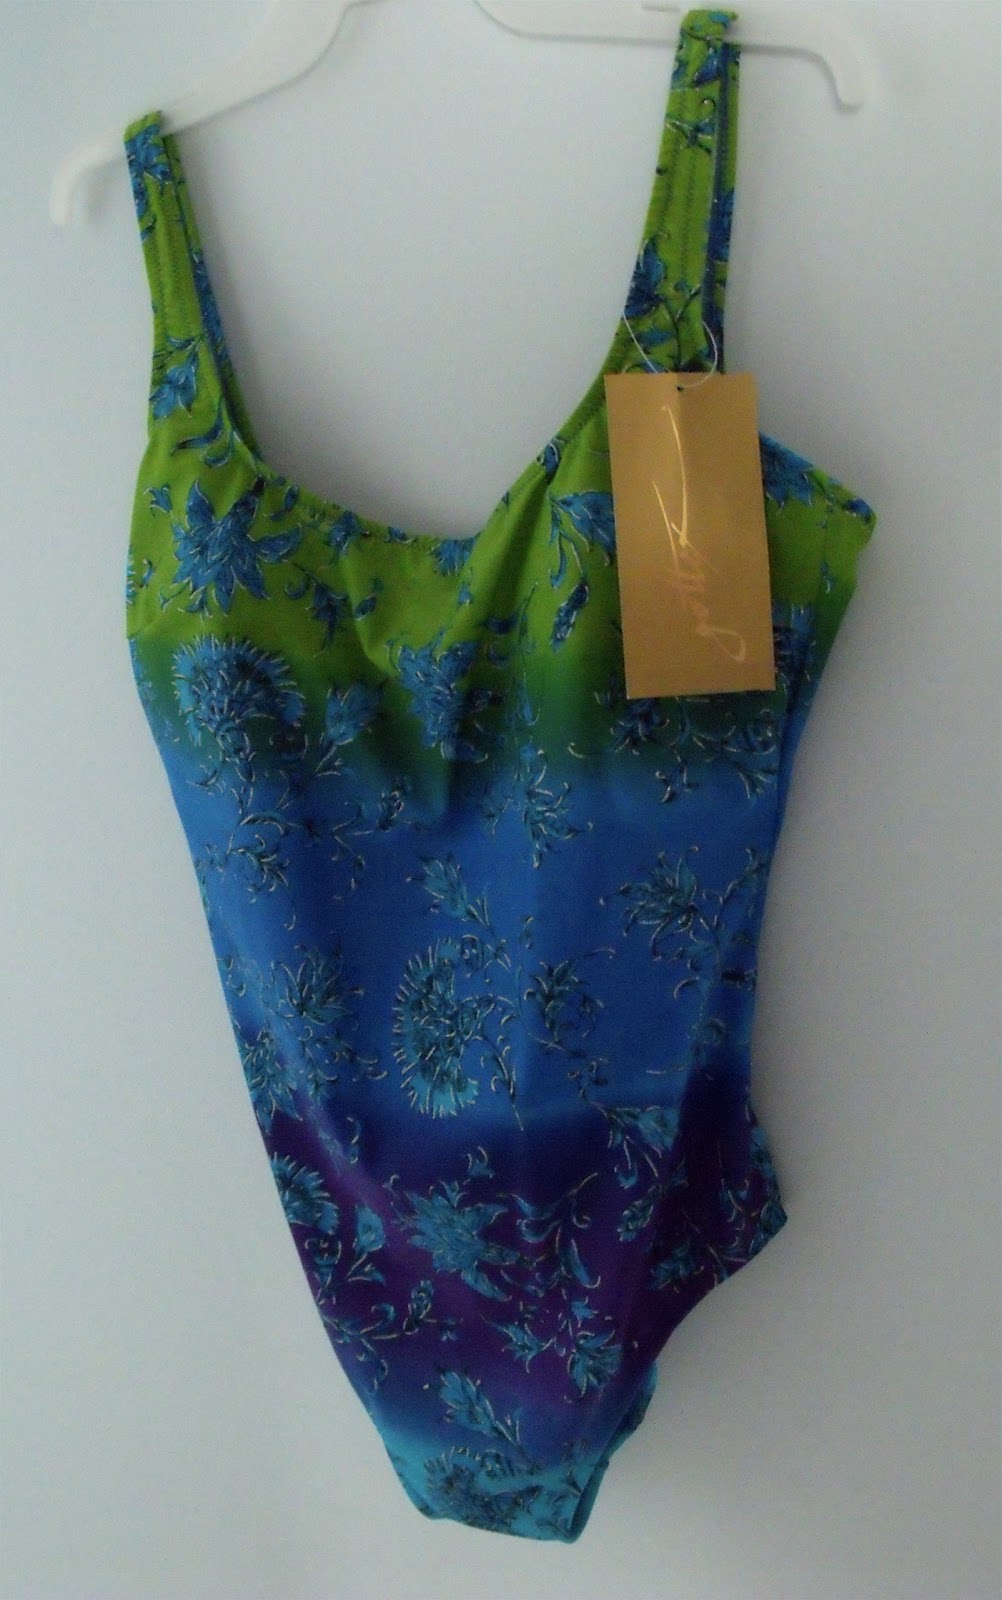 My Stuff for Sale: GOTTEX Ladies Swimsuit New With Tags Size 16 $25